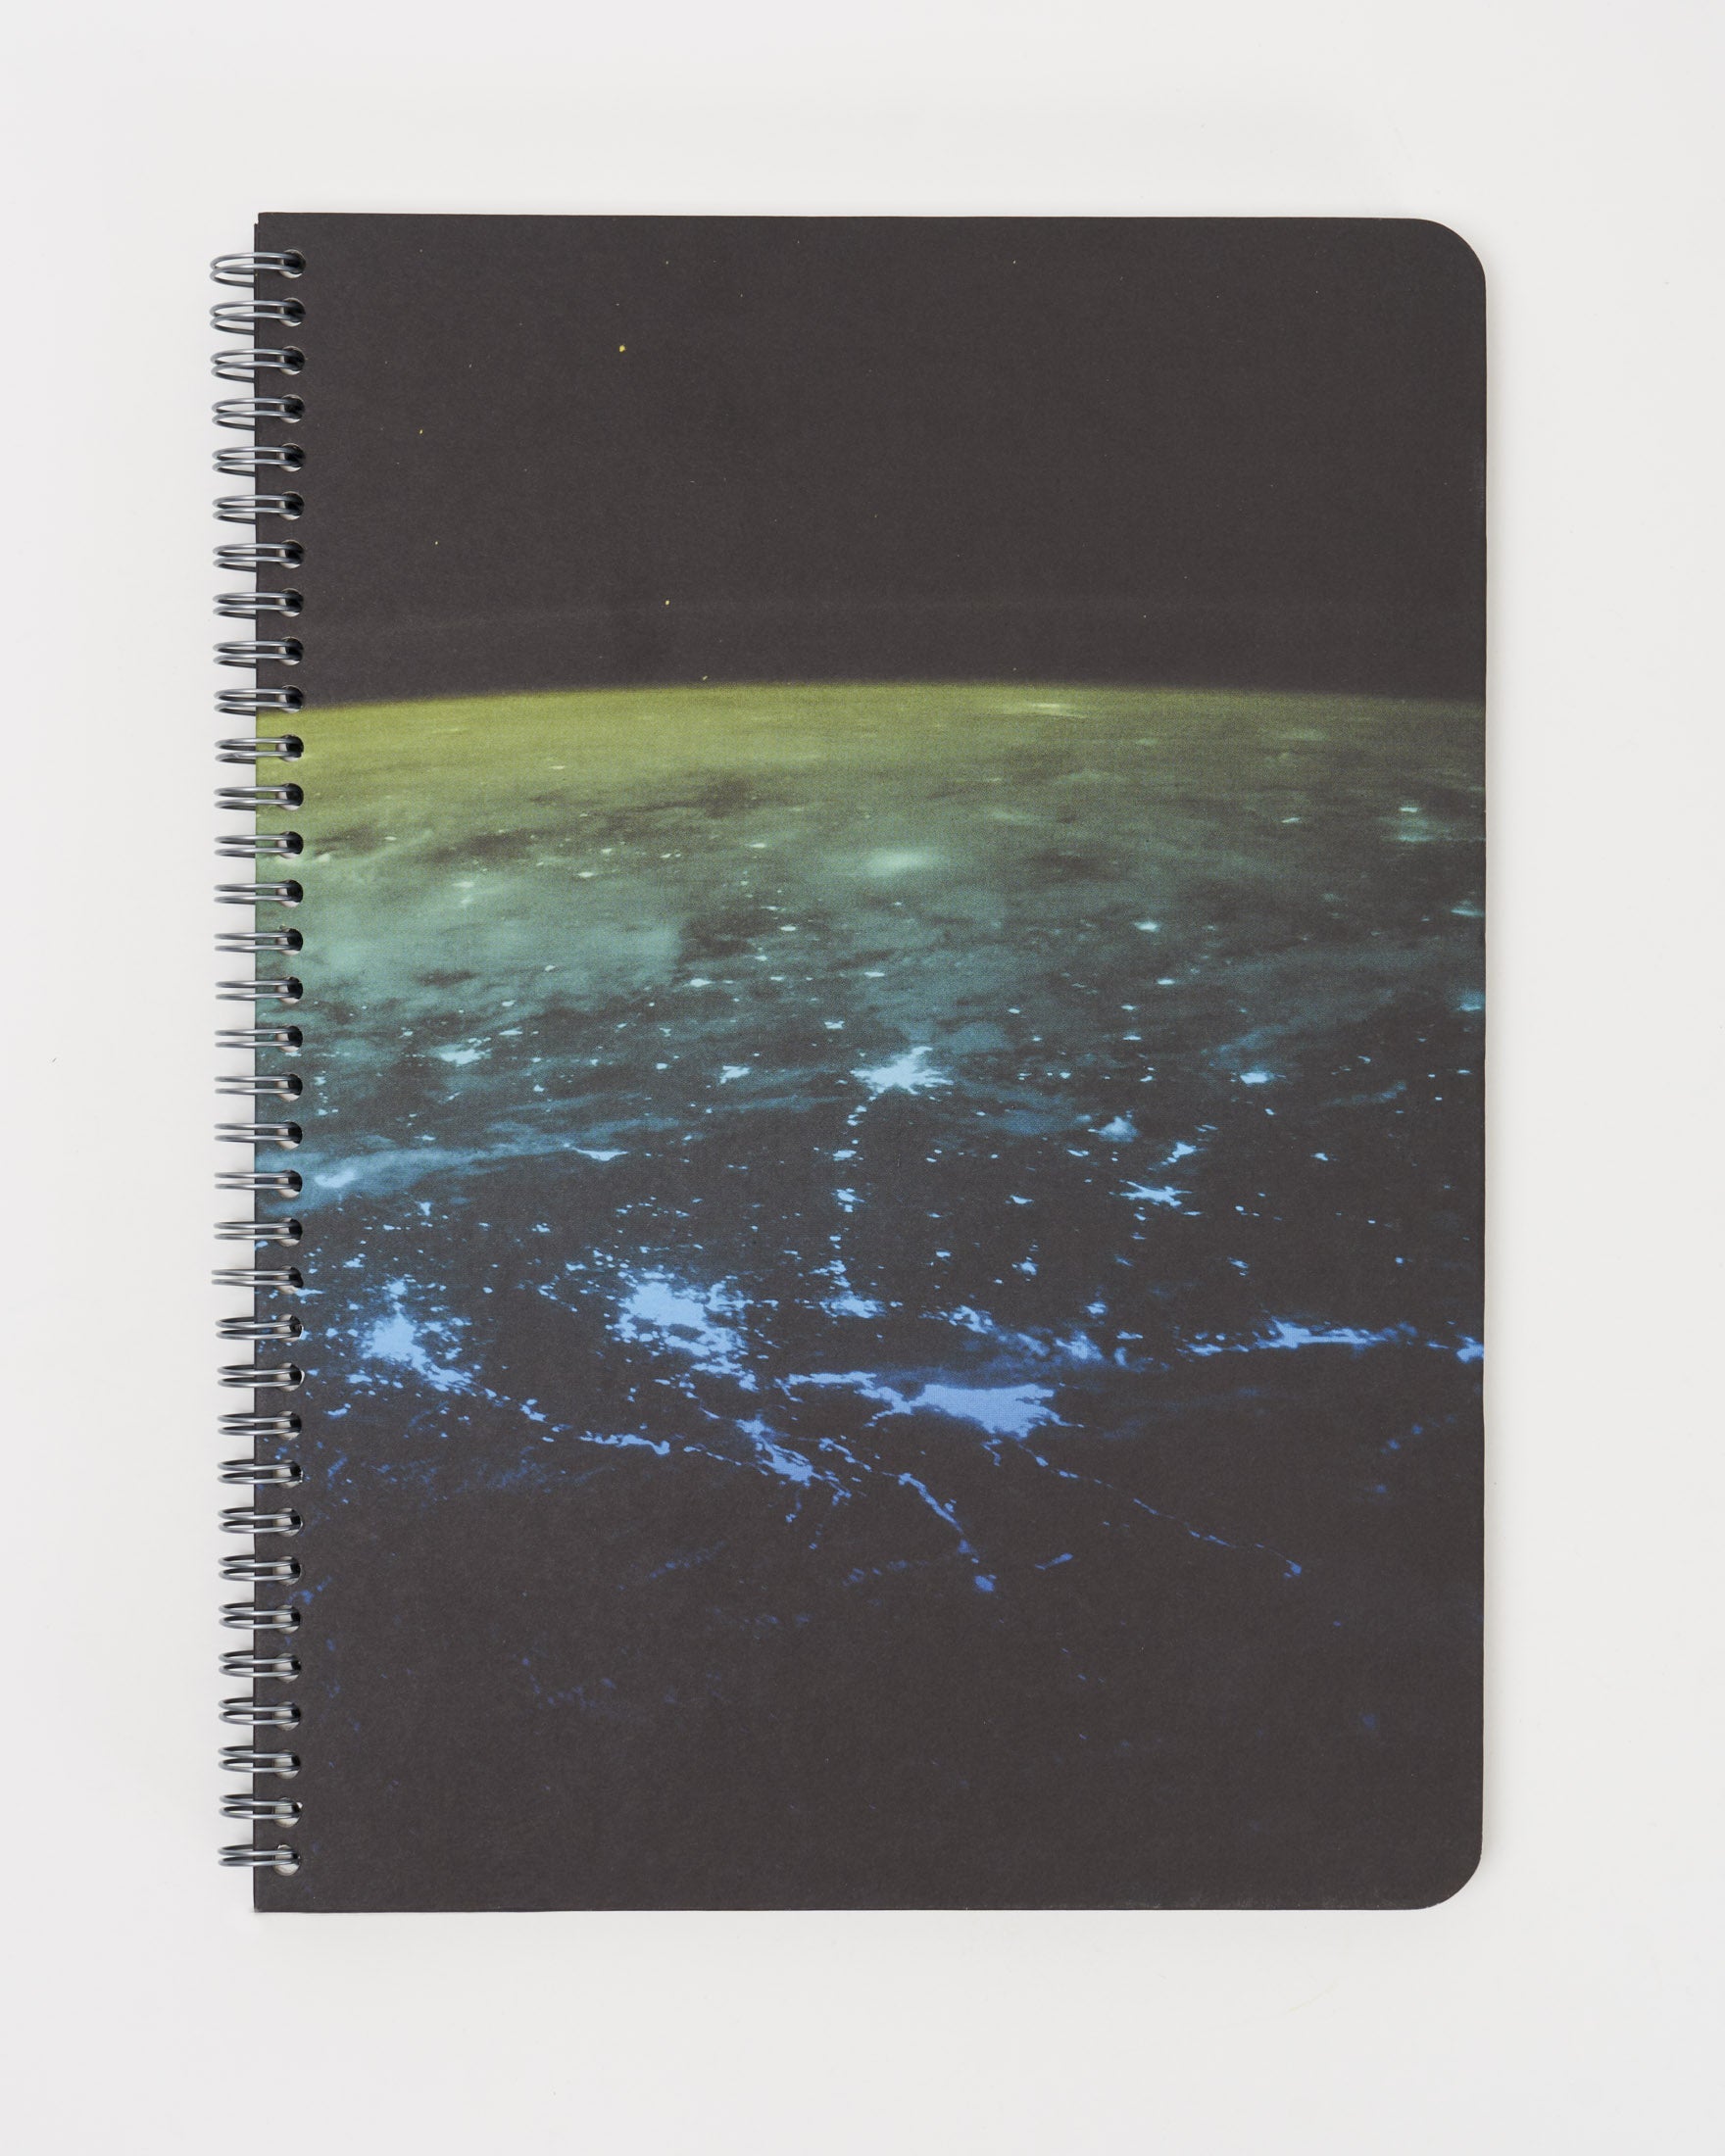 The Edge of the Atmosphere Spiral Notebook